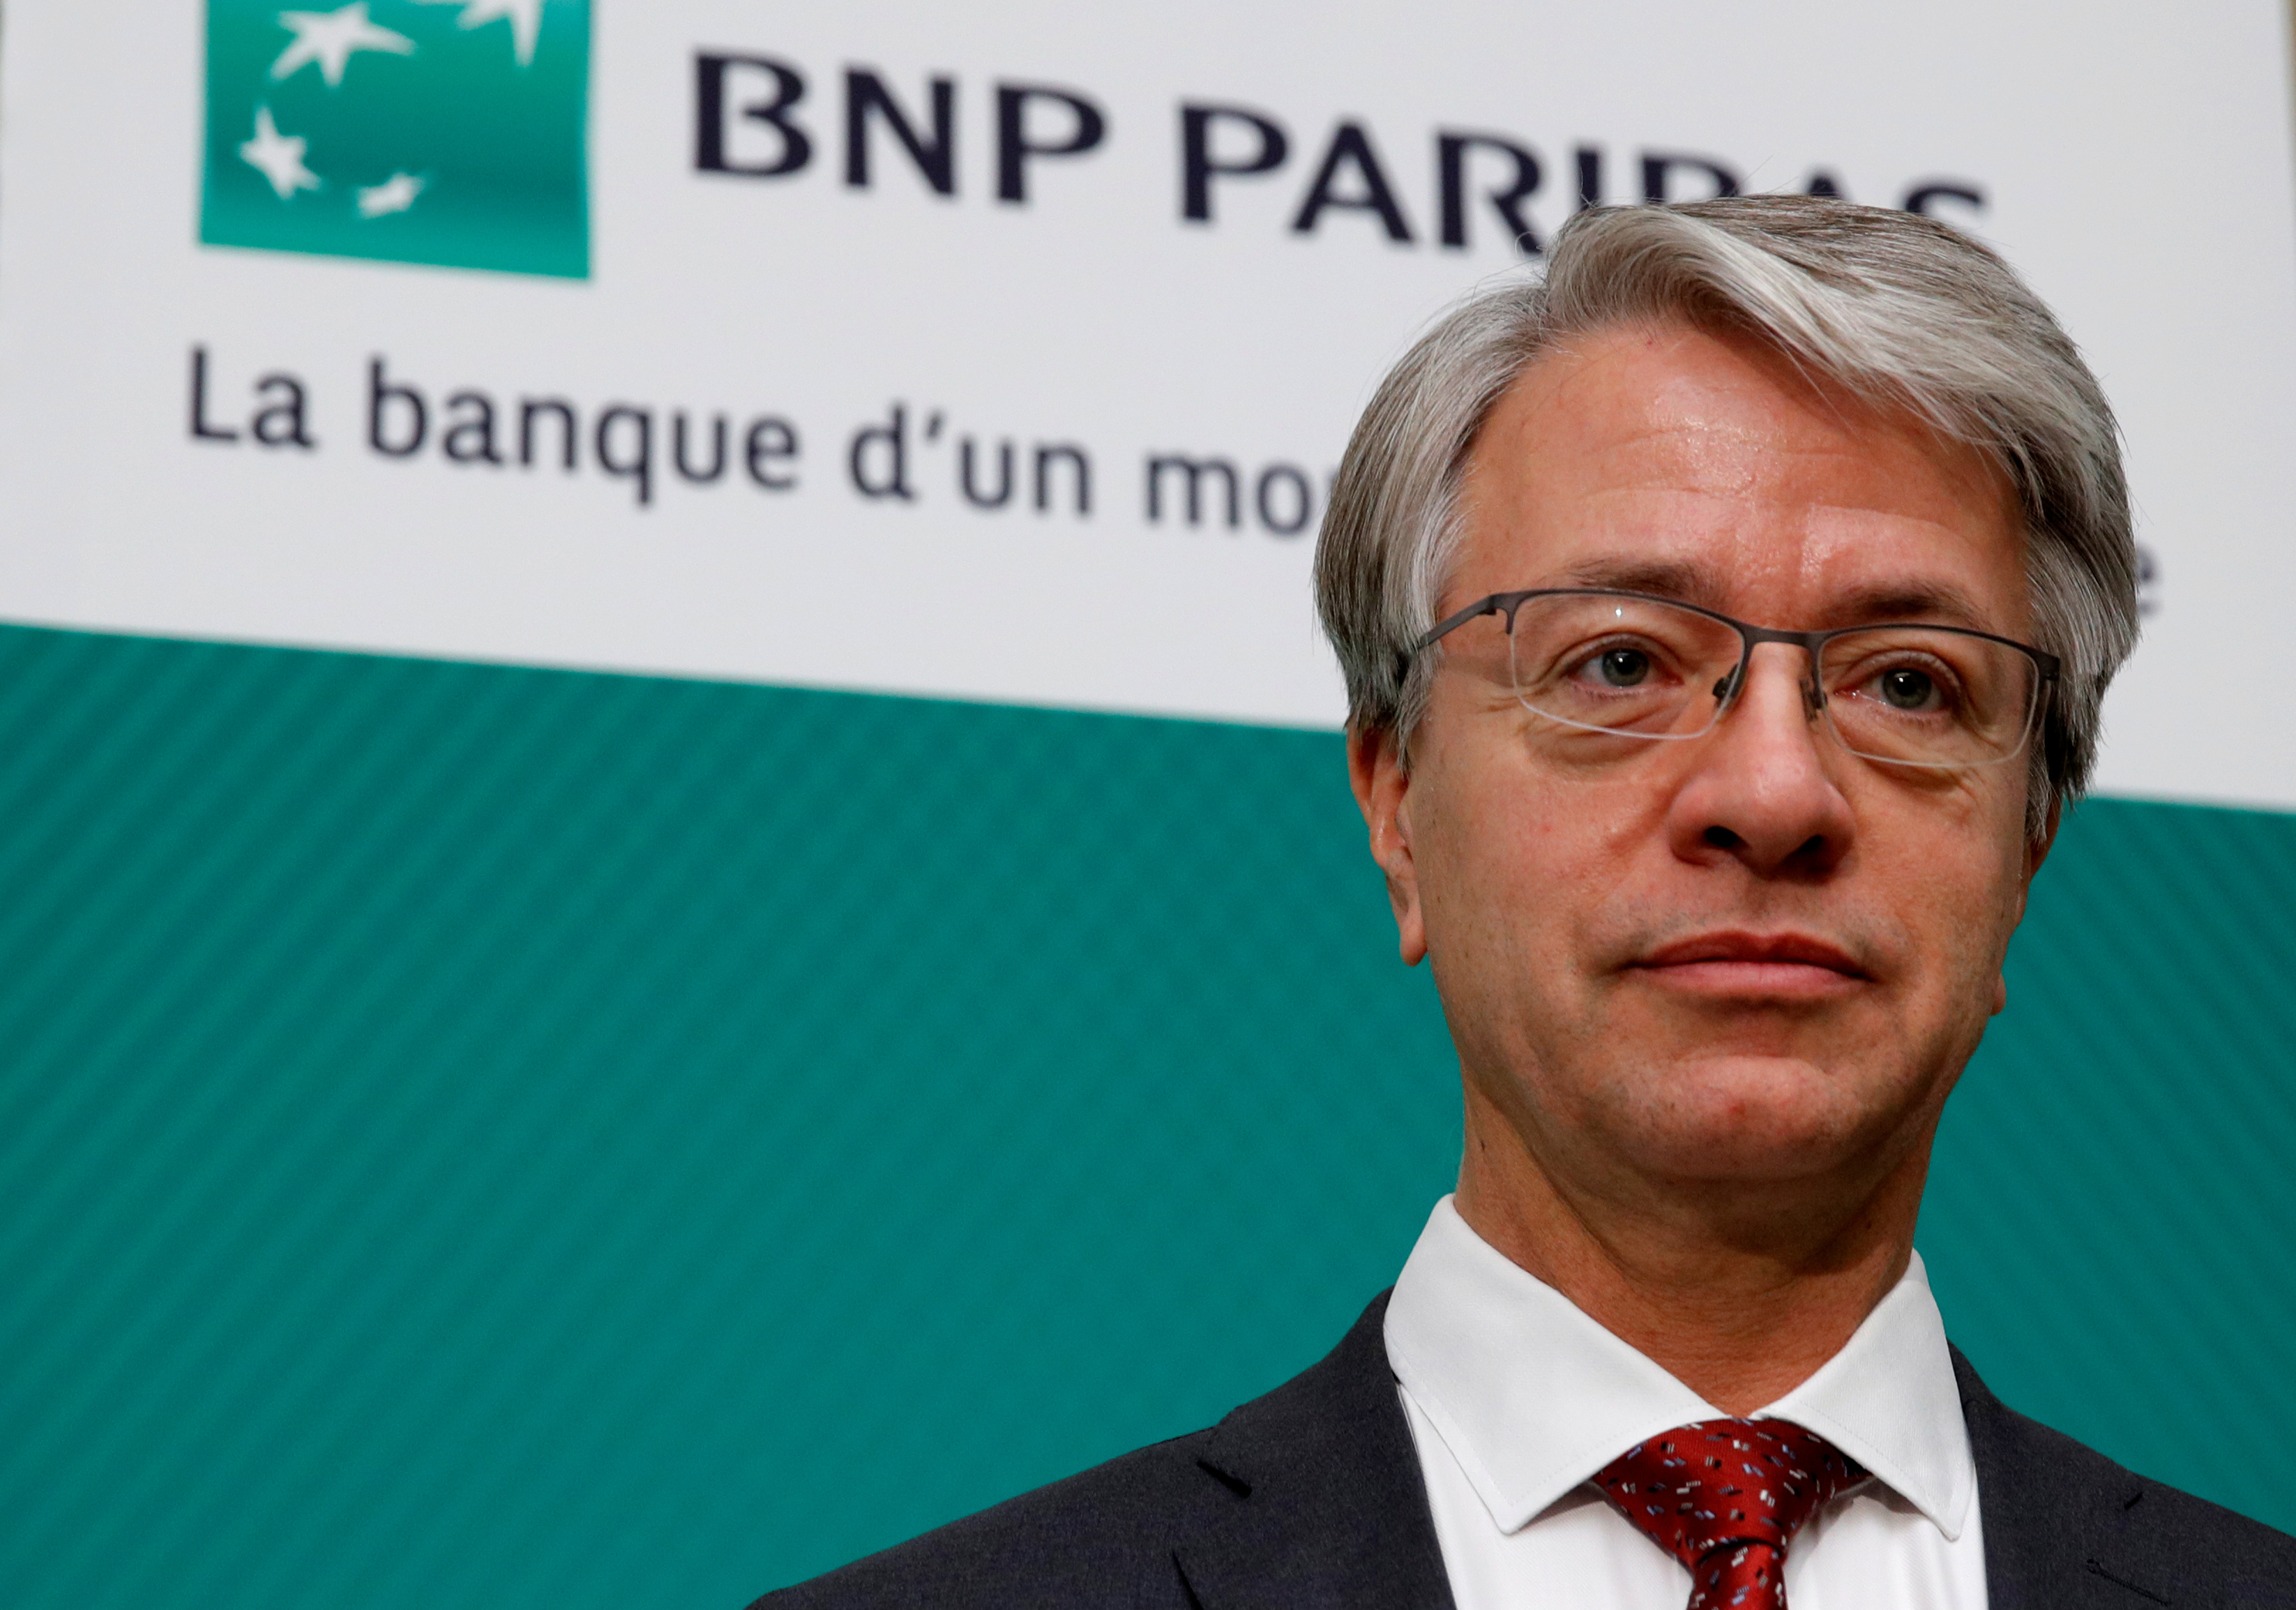 BNP Paribas CEO Jean-Laurent Bonnafe poses before a news conference to present the bank's 2018 second quarter results in Paris